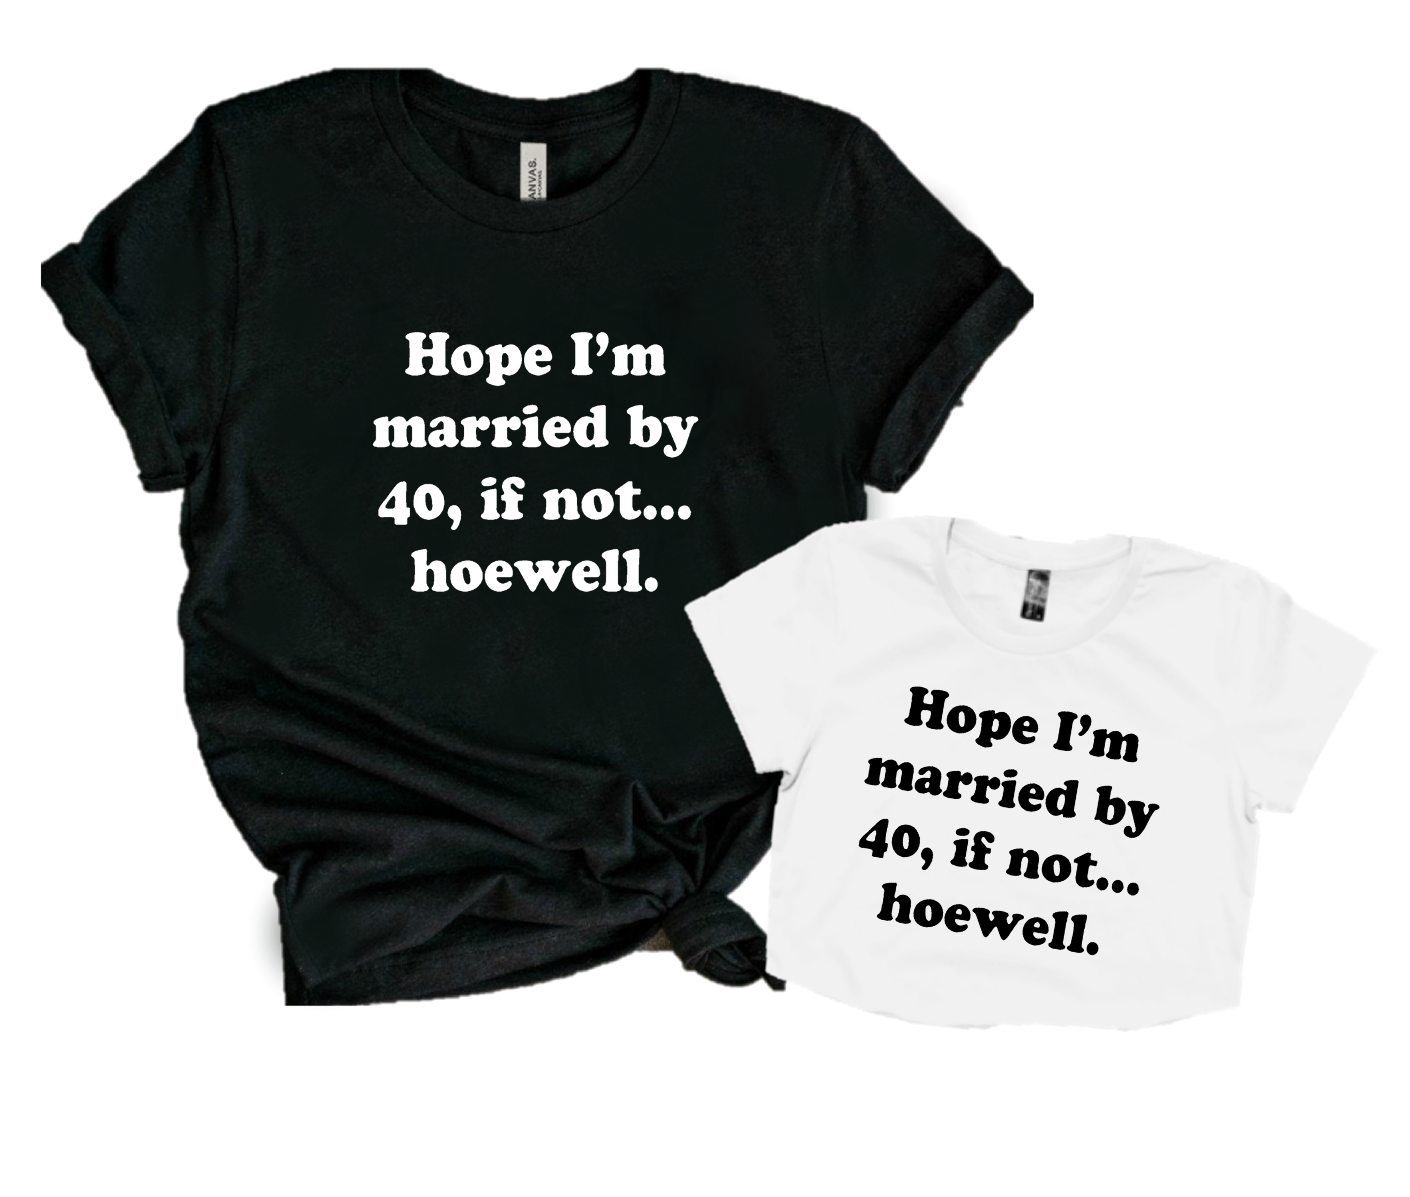 HOPE I'M MARRIED BY 40, IF NOT... HOEWELL